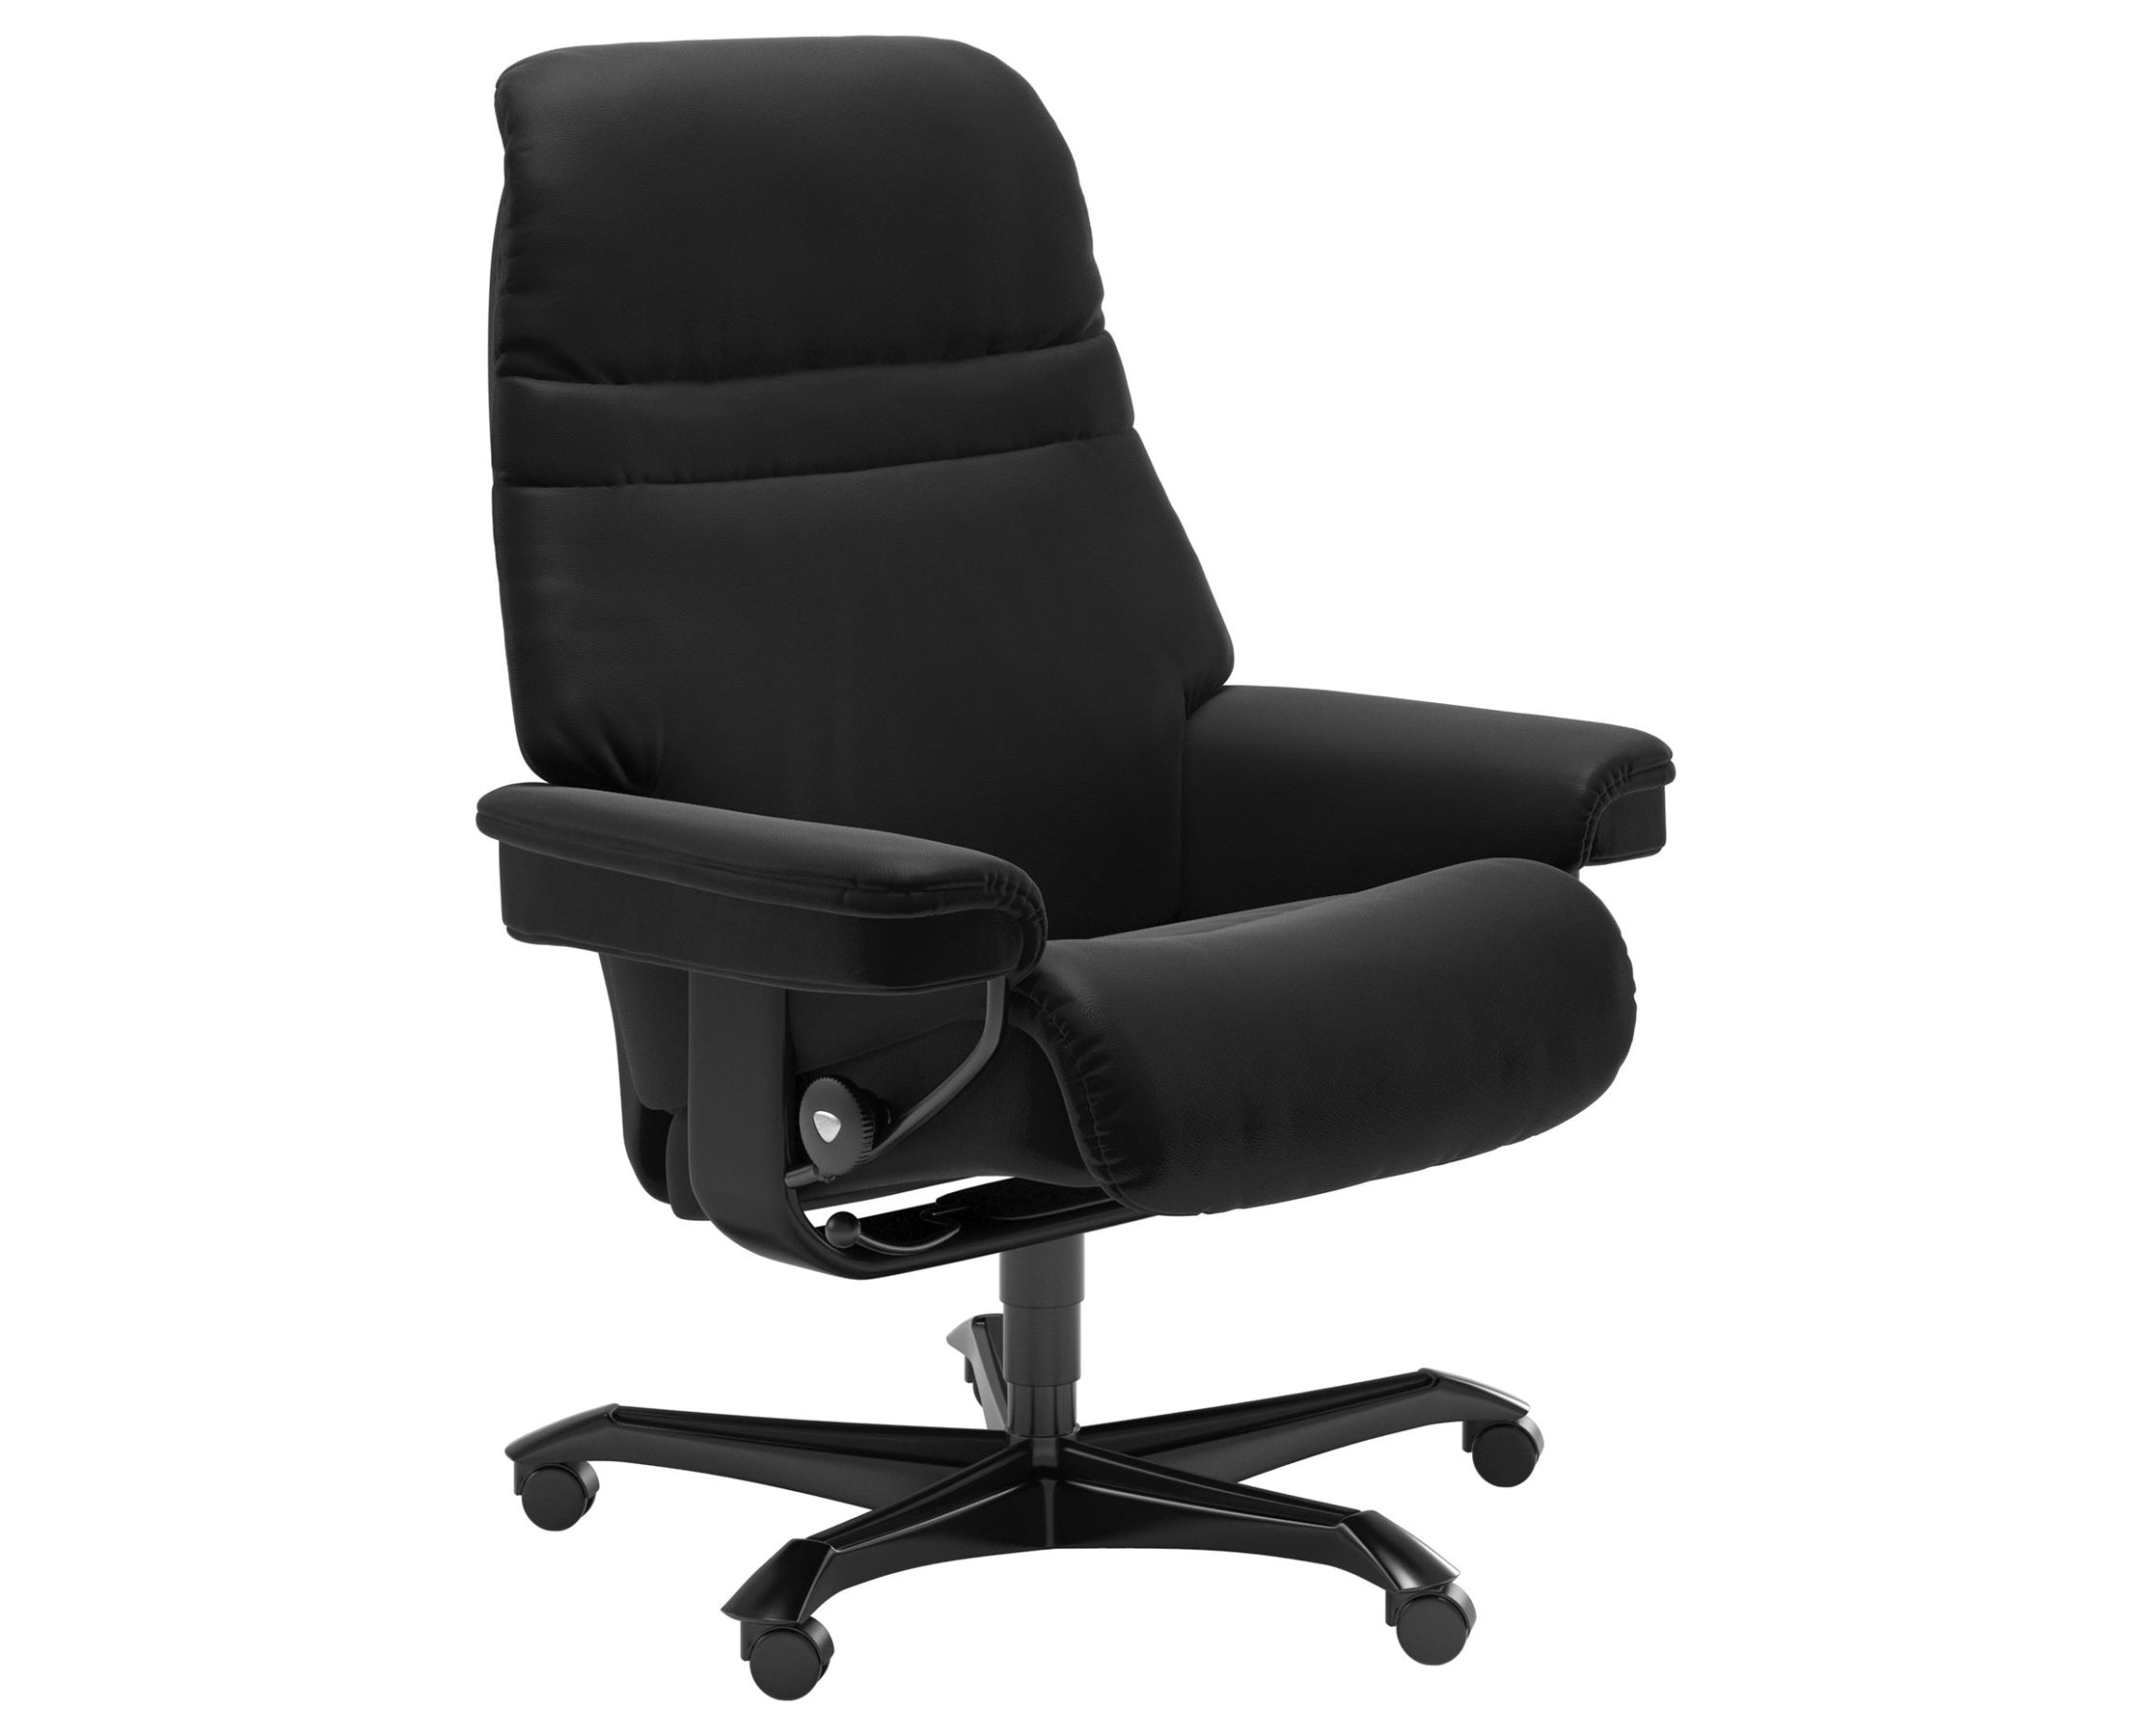 Paloma Leather Black M and Black Base | Stressless Sunrise Home Office Chair | Valley Ridge Furniture